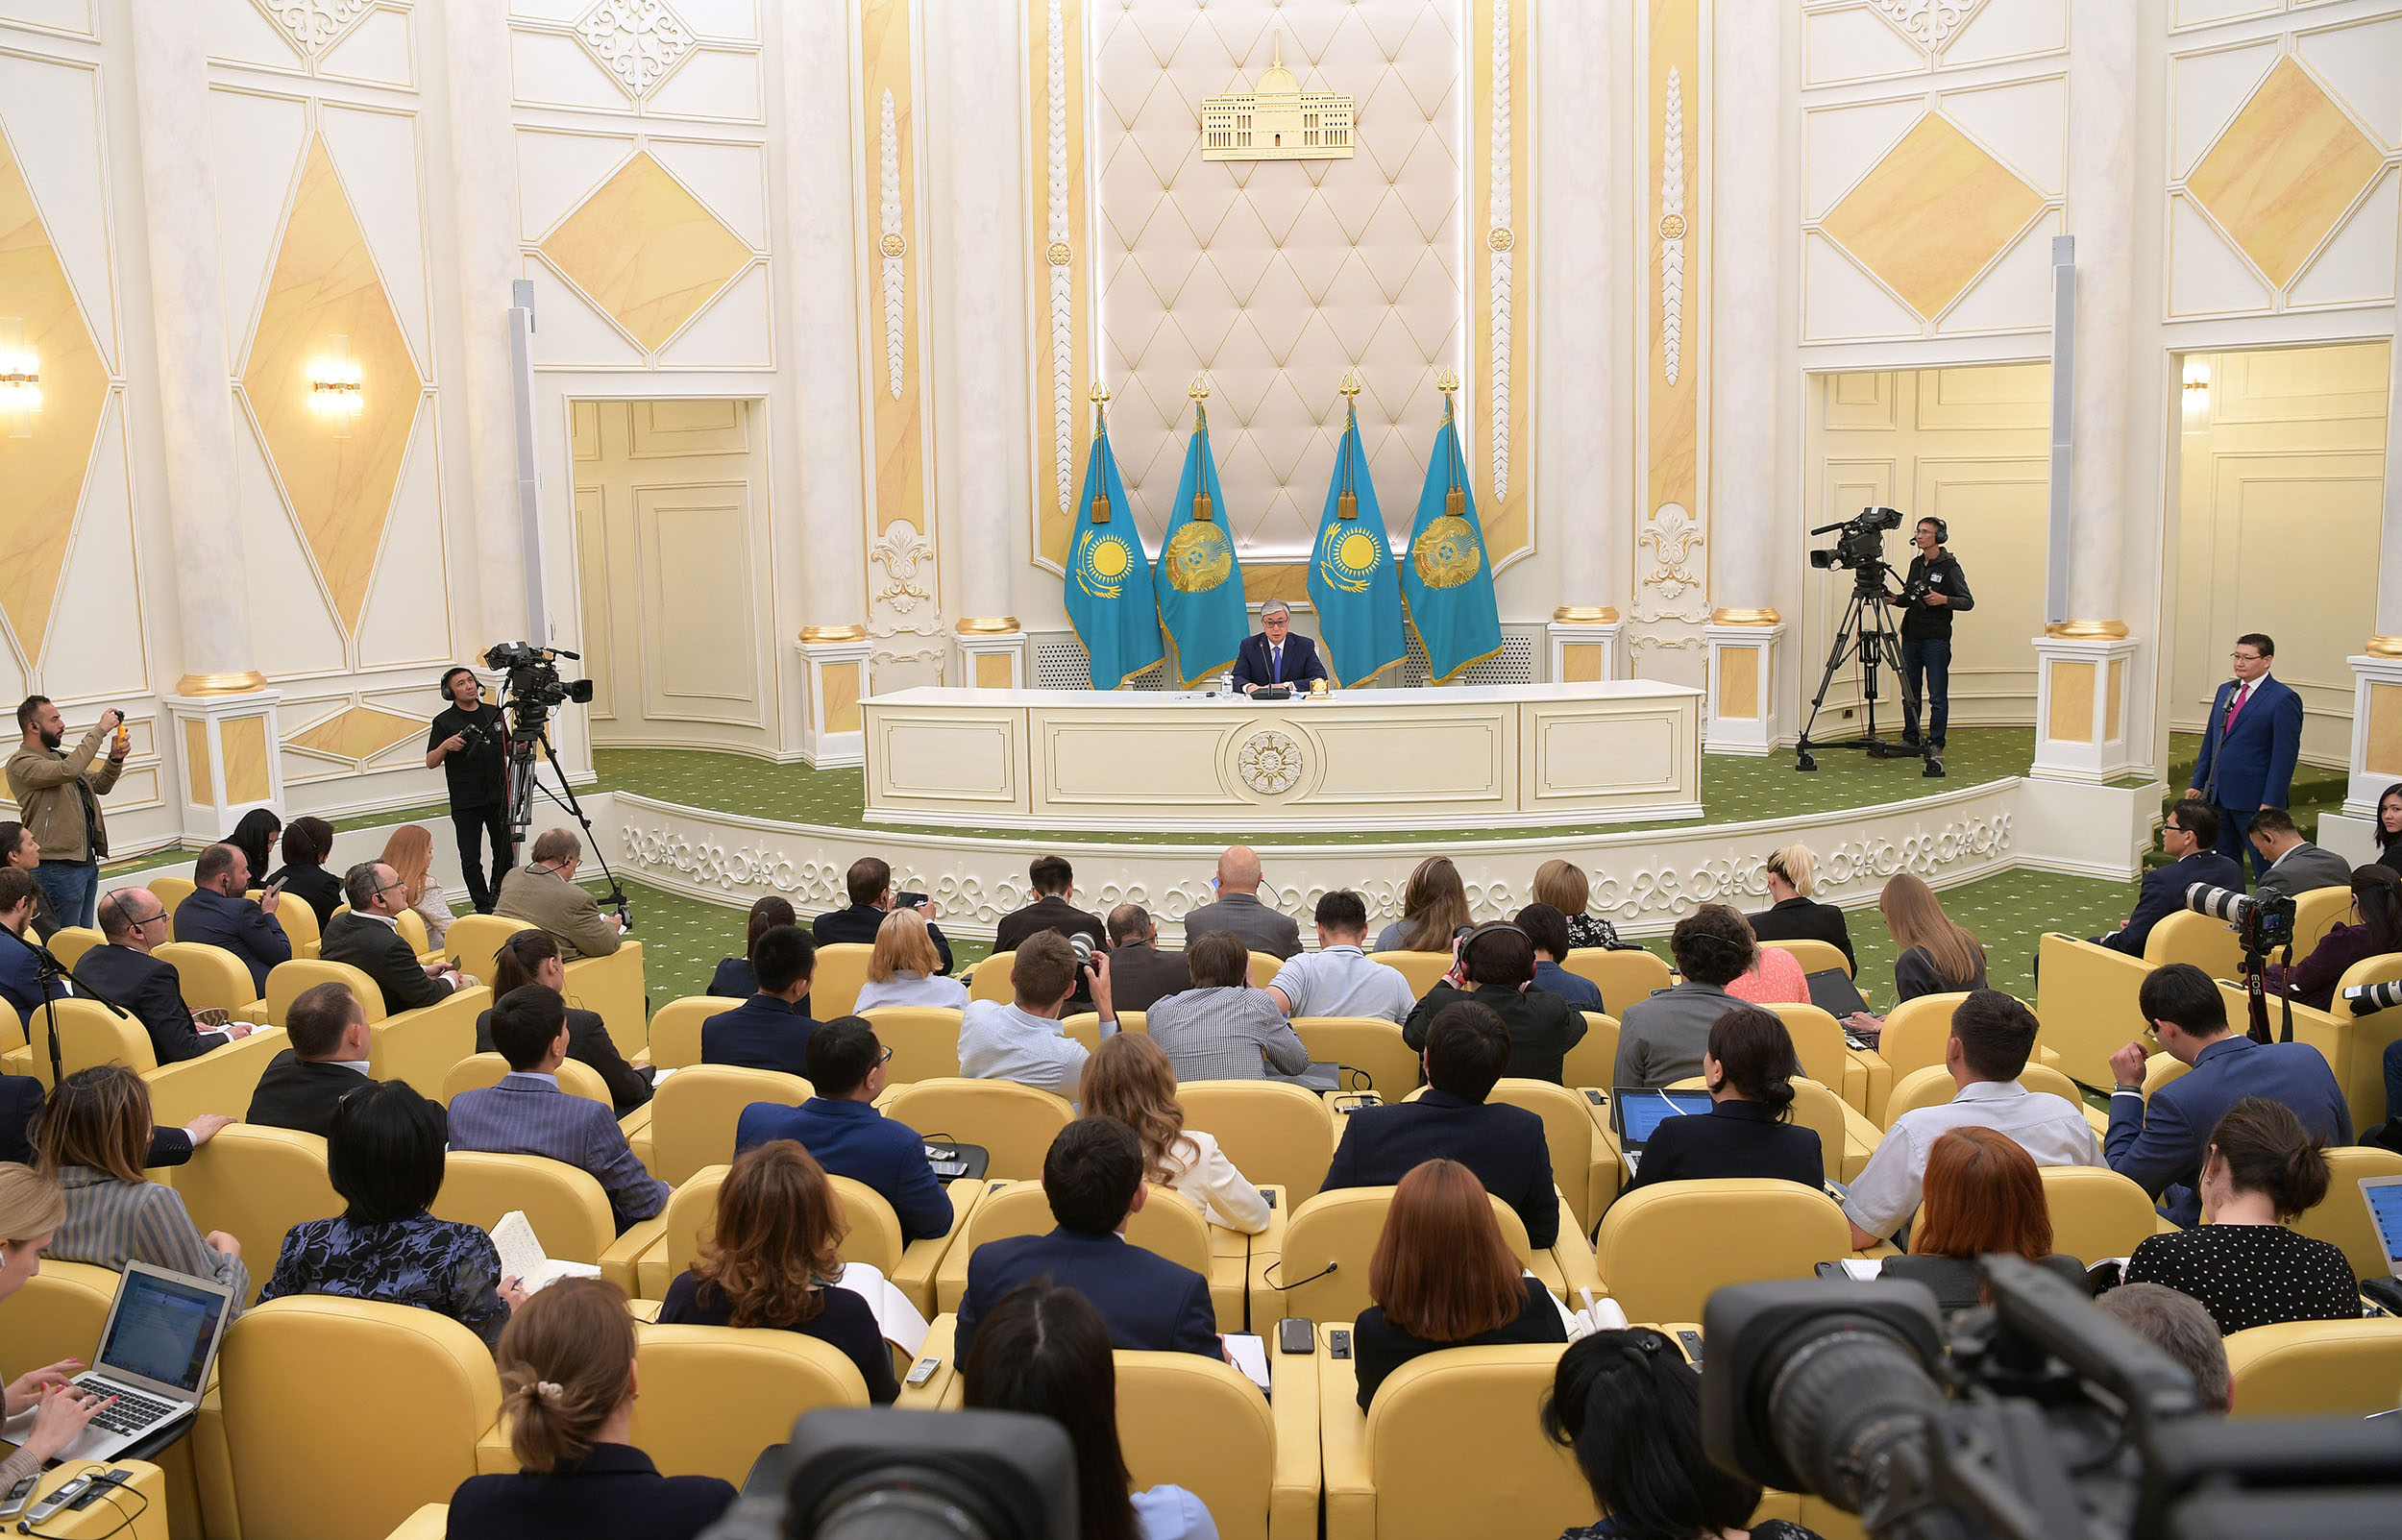 Inauguration of the President of the Republic of Kazakhstan is scheduled for June 12